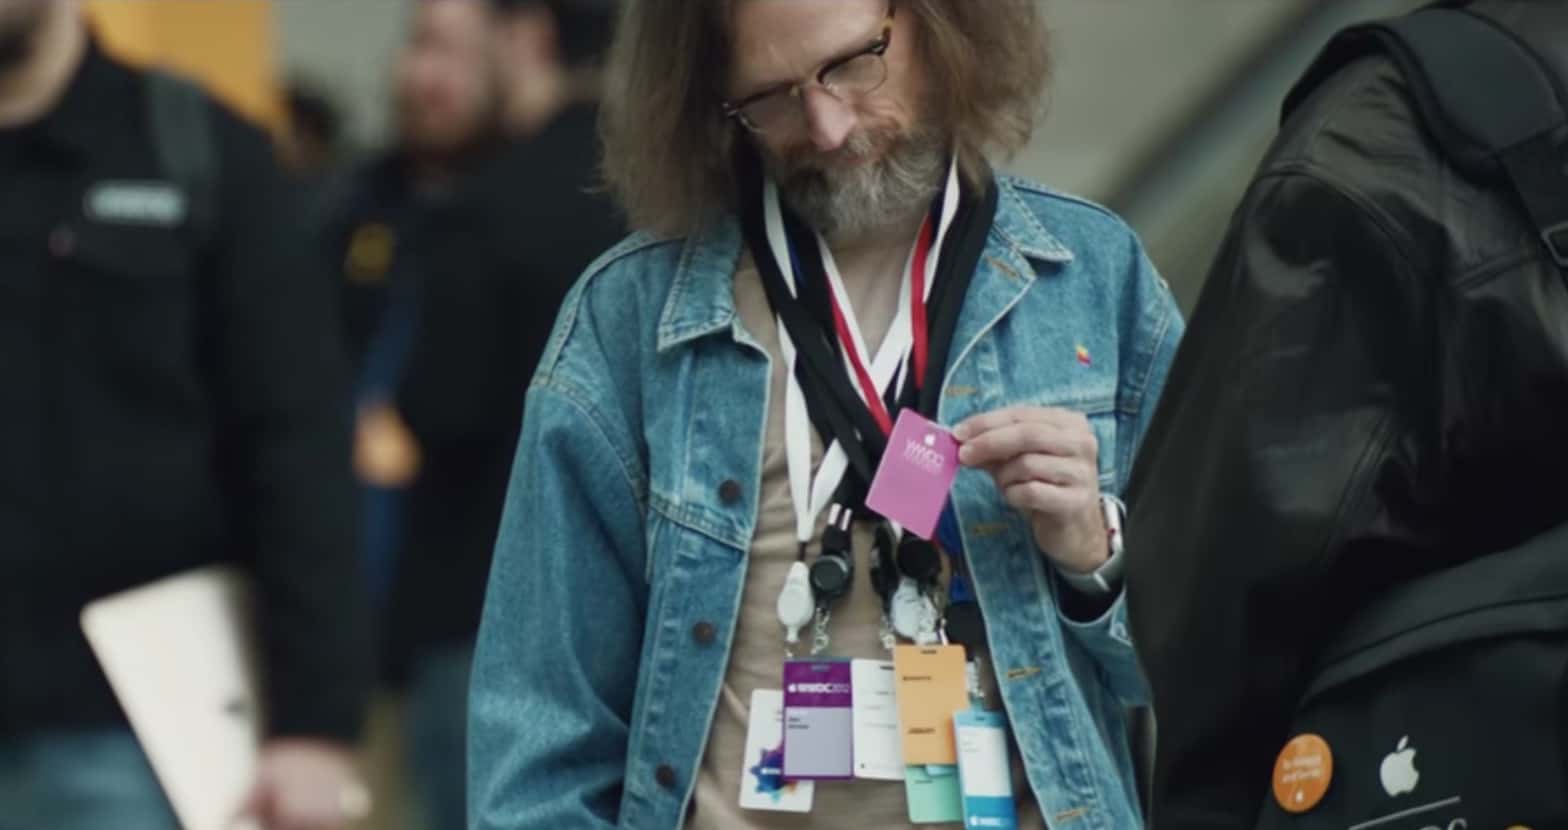 Self-deprecating humor rules in the Apple WWDC 2018 video about developers.